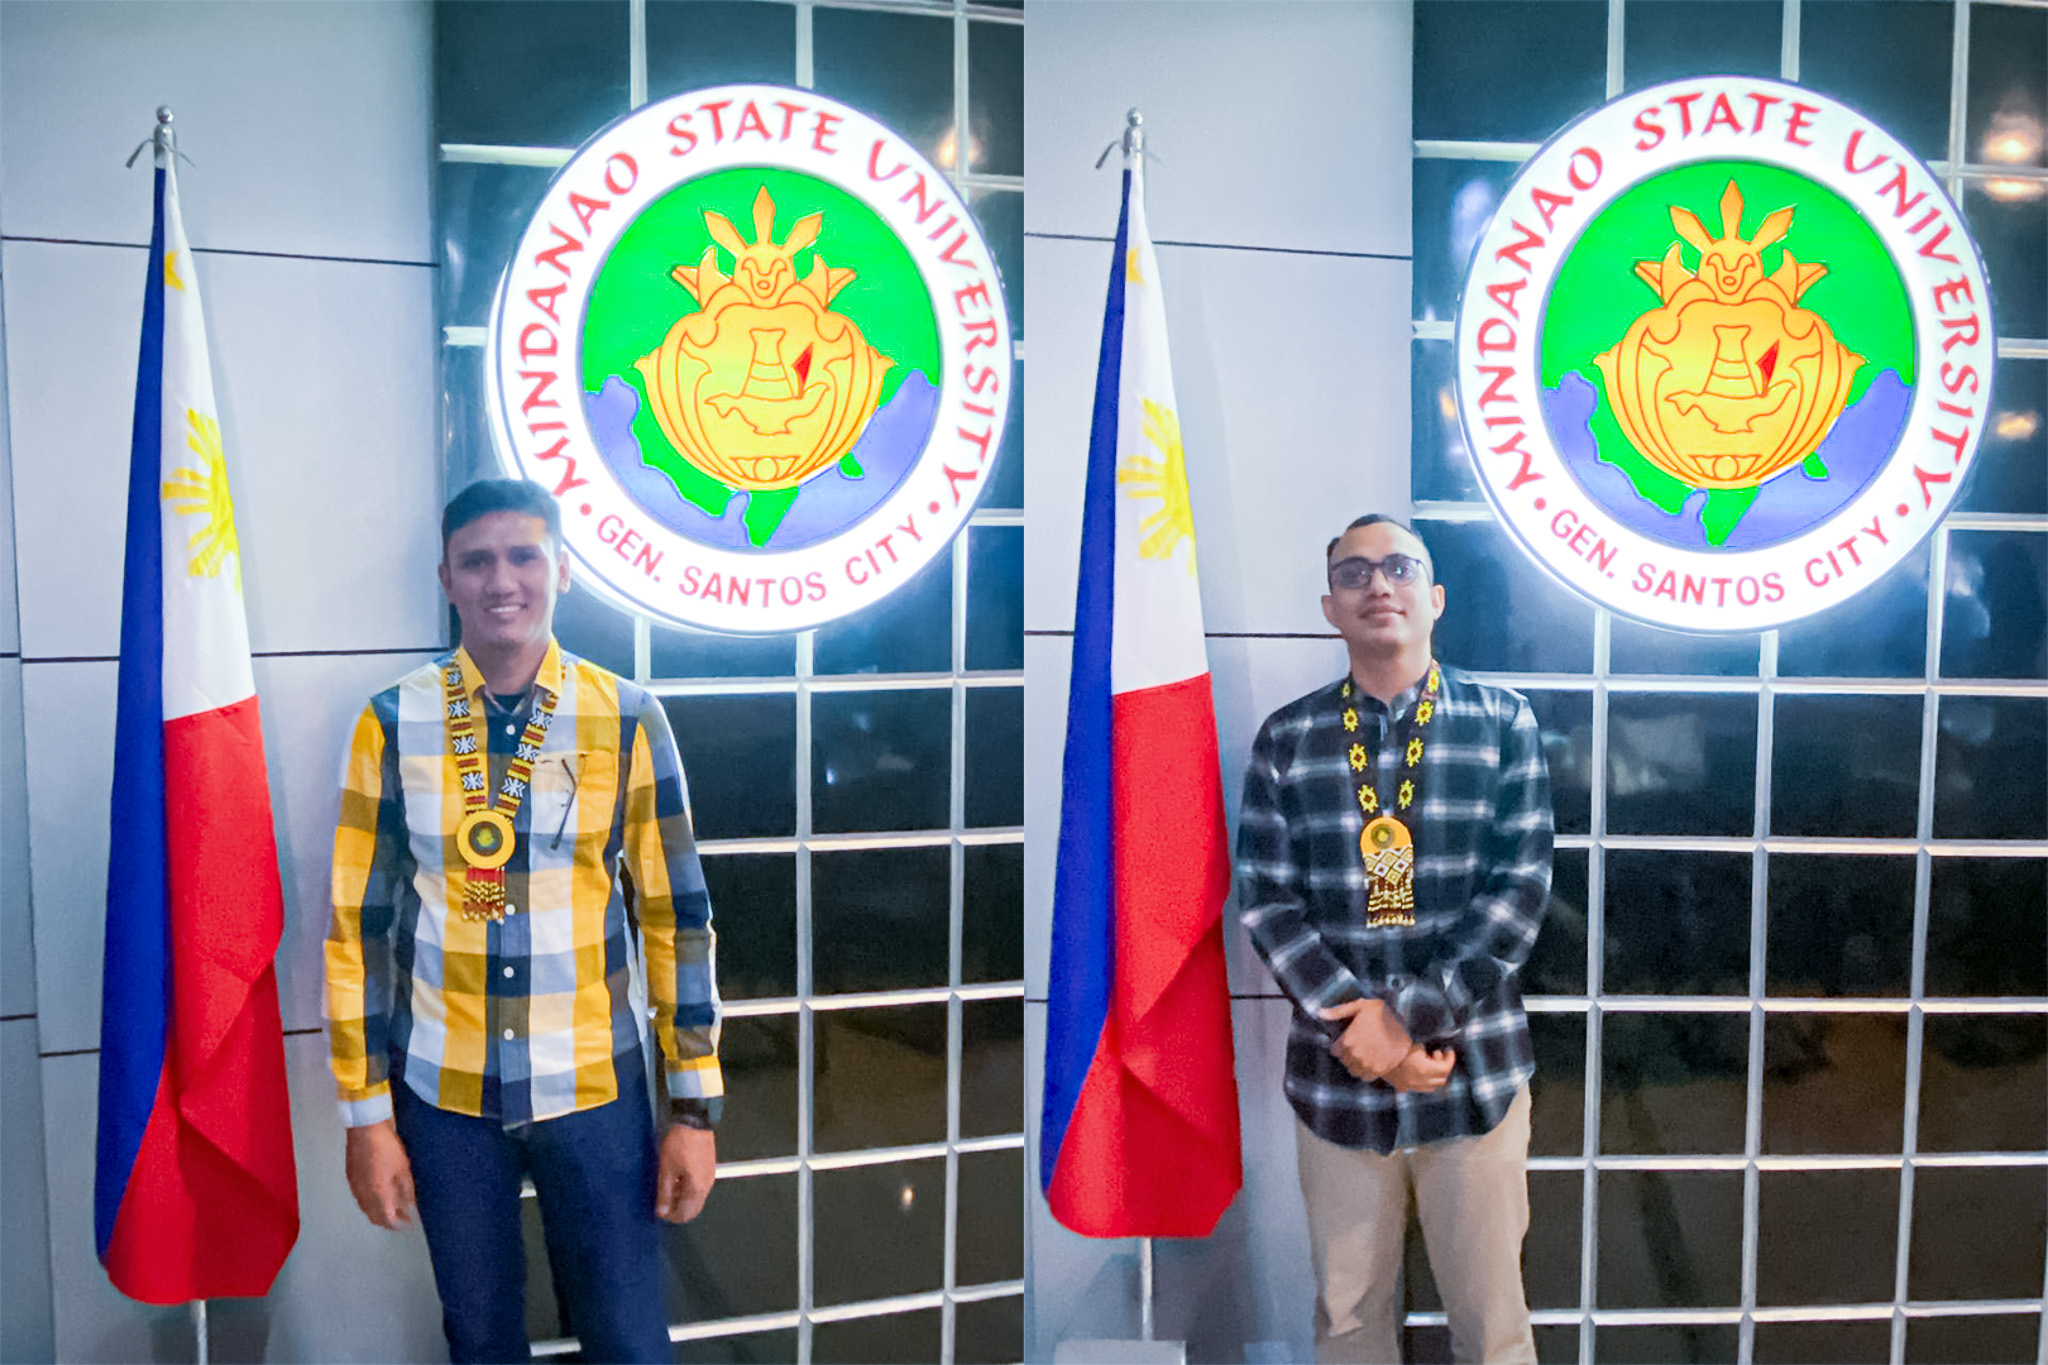 Media Article by Two UIII Students on the Mindanao Peace Process